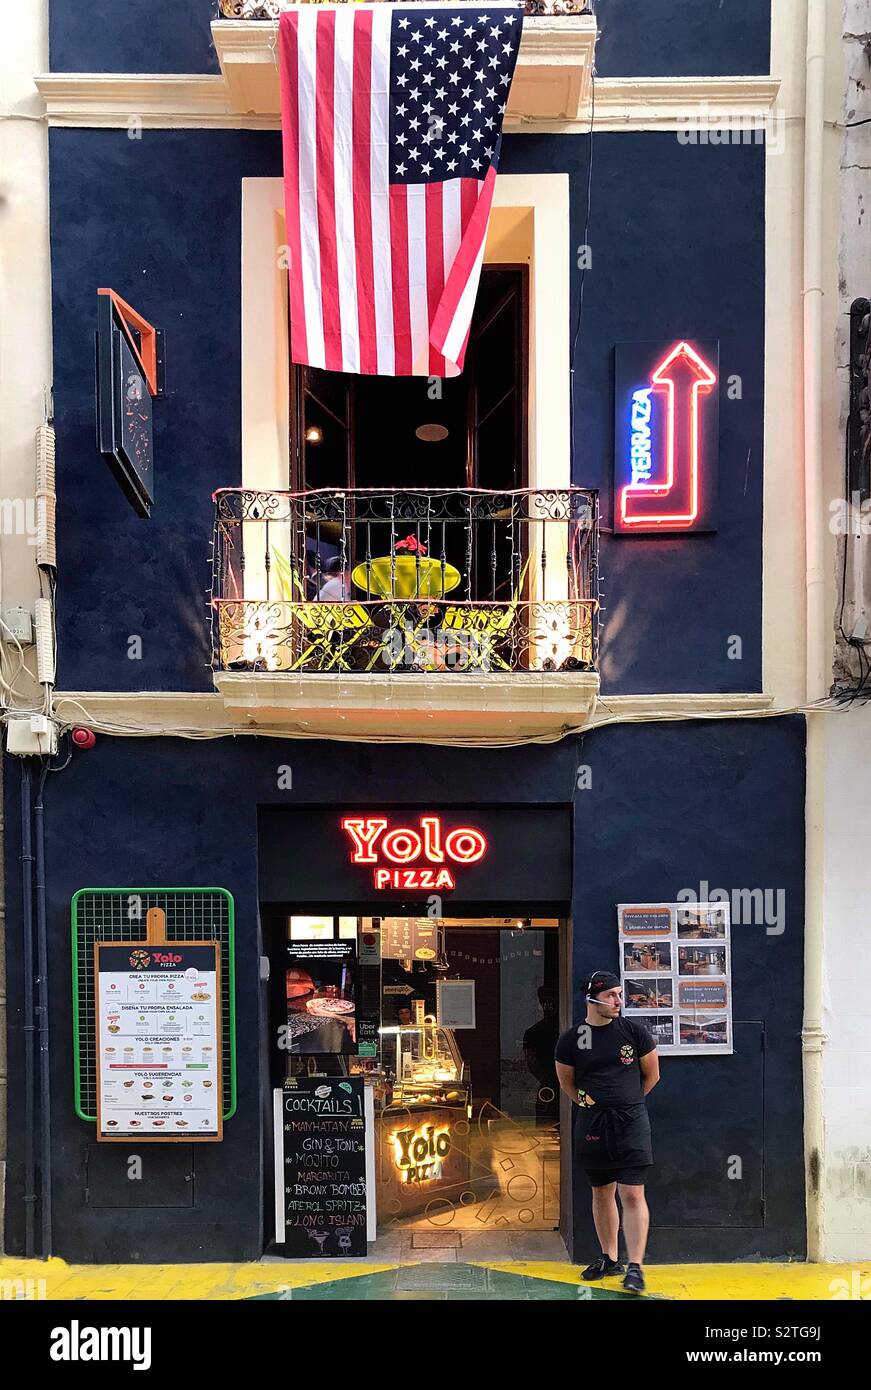 Yolo Pizza, Alicante, Spain where they fly the American flag outside the colourful restaurant facade. Stock Photo